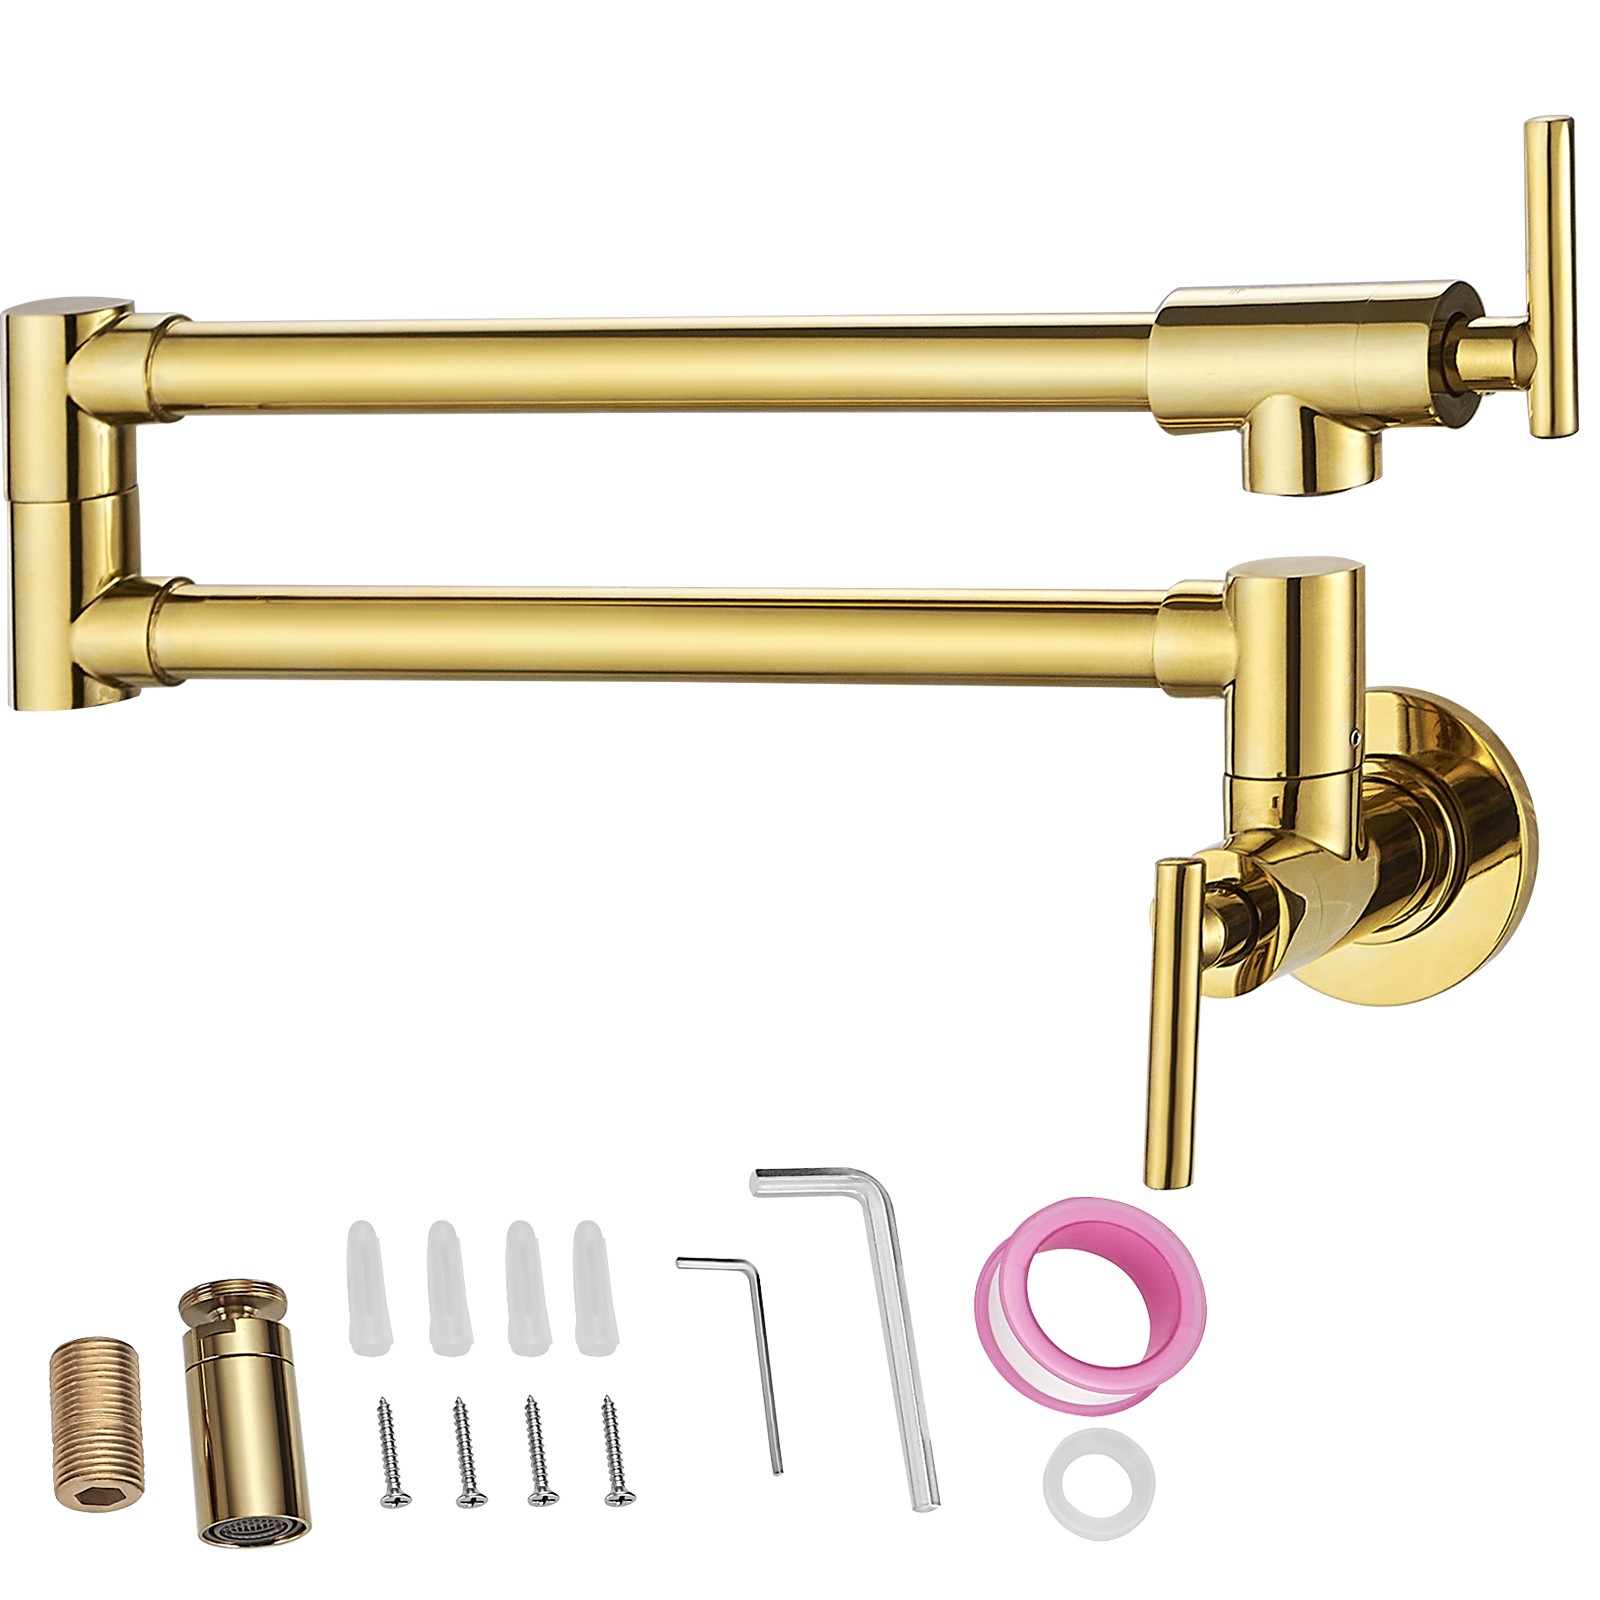 VEVOR Pot Filler Faucet, Solid Brass Commercial Wall Mount Kitchen Stove  Faucet with Gold Brushed Finish, Folding Restaurant Sink Faucet with Double  Joint Swing Arm  Handles VEVOR US